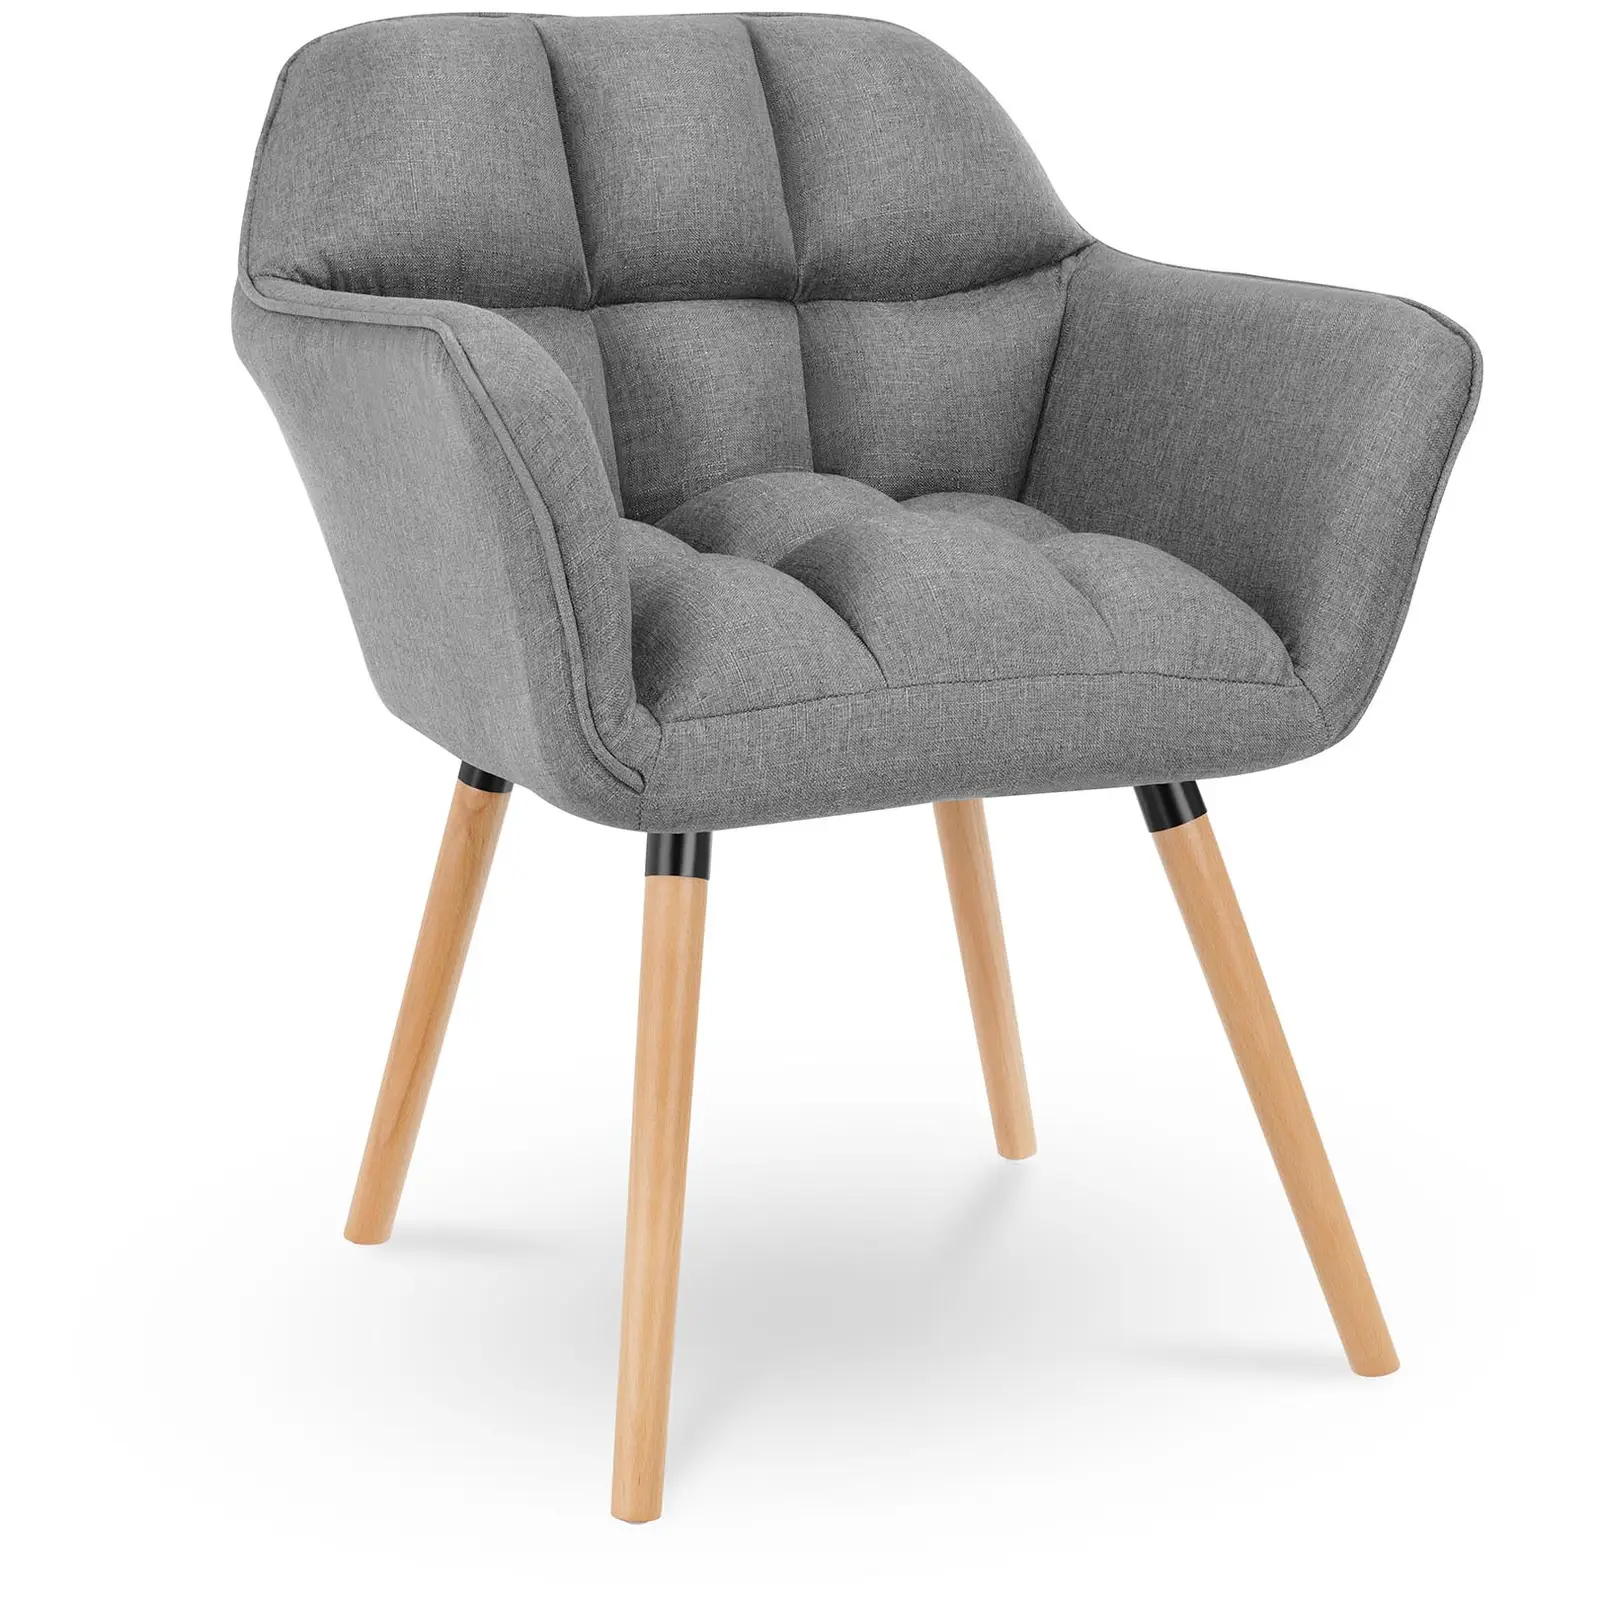 Cushioned Chair - up to 150 kg - seat 40 x 38.5 cm - grey